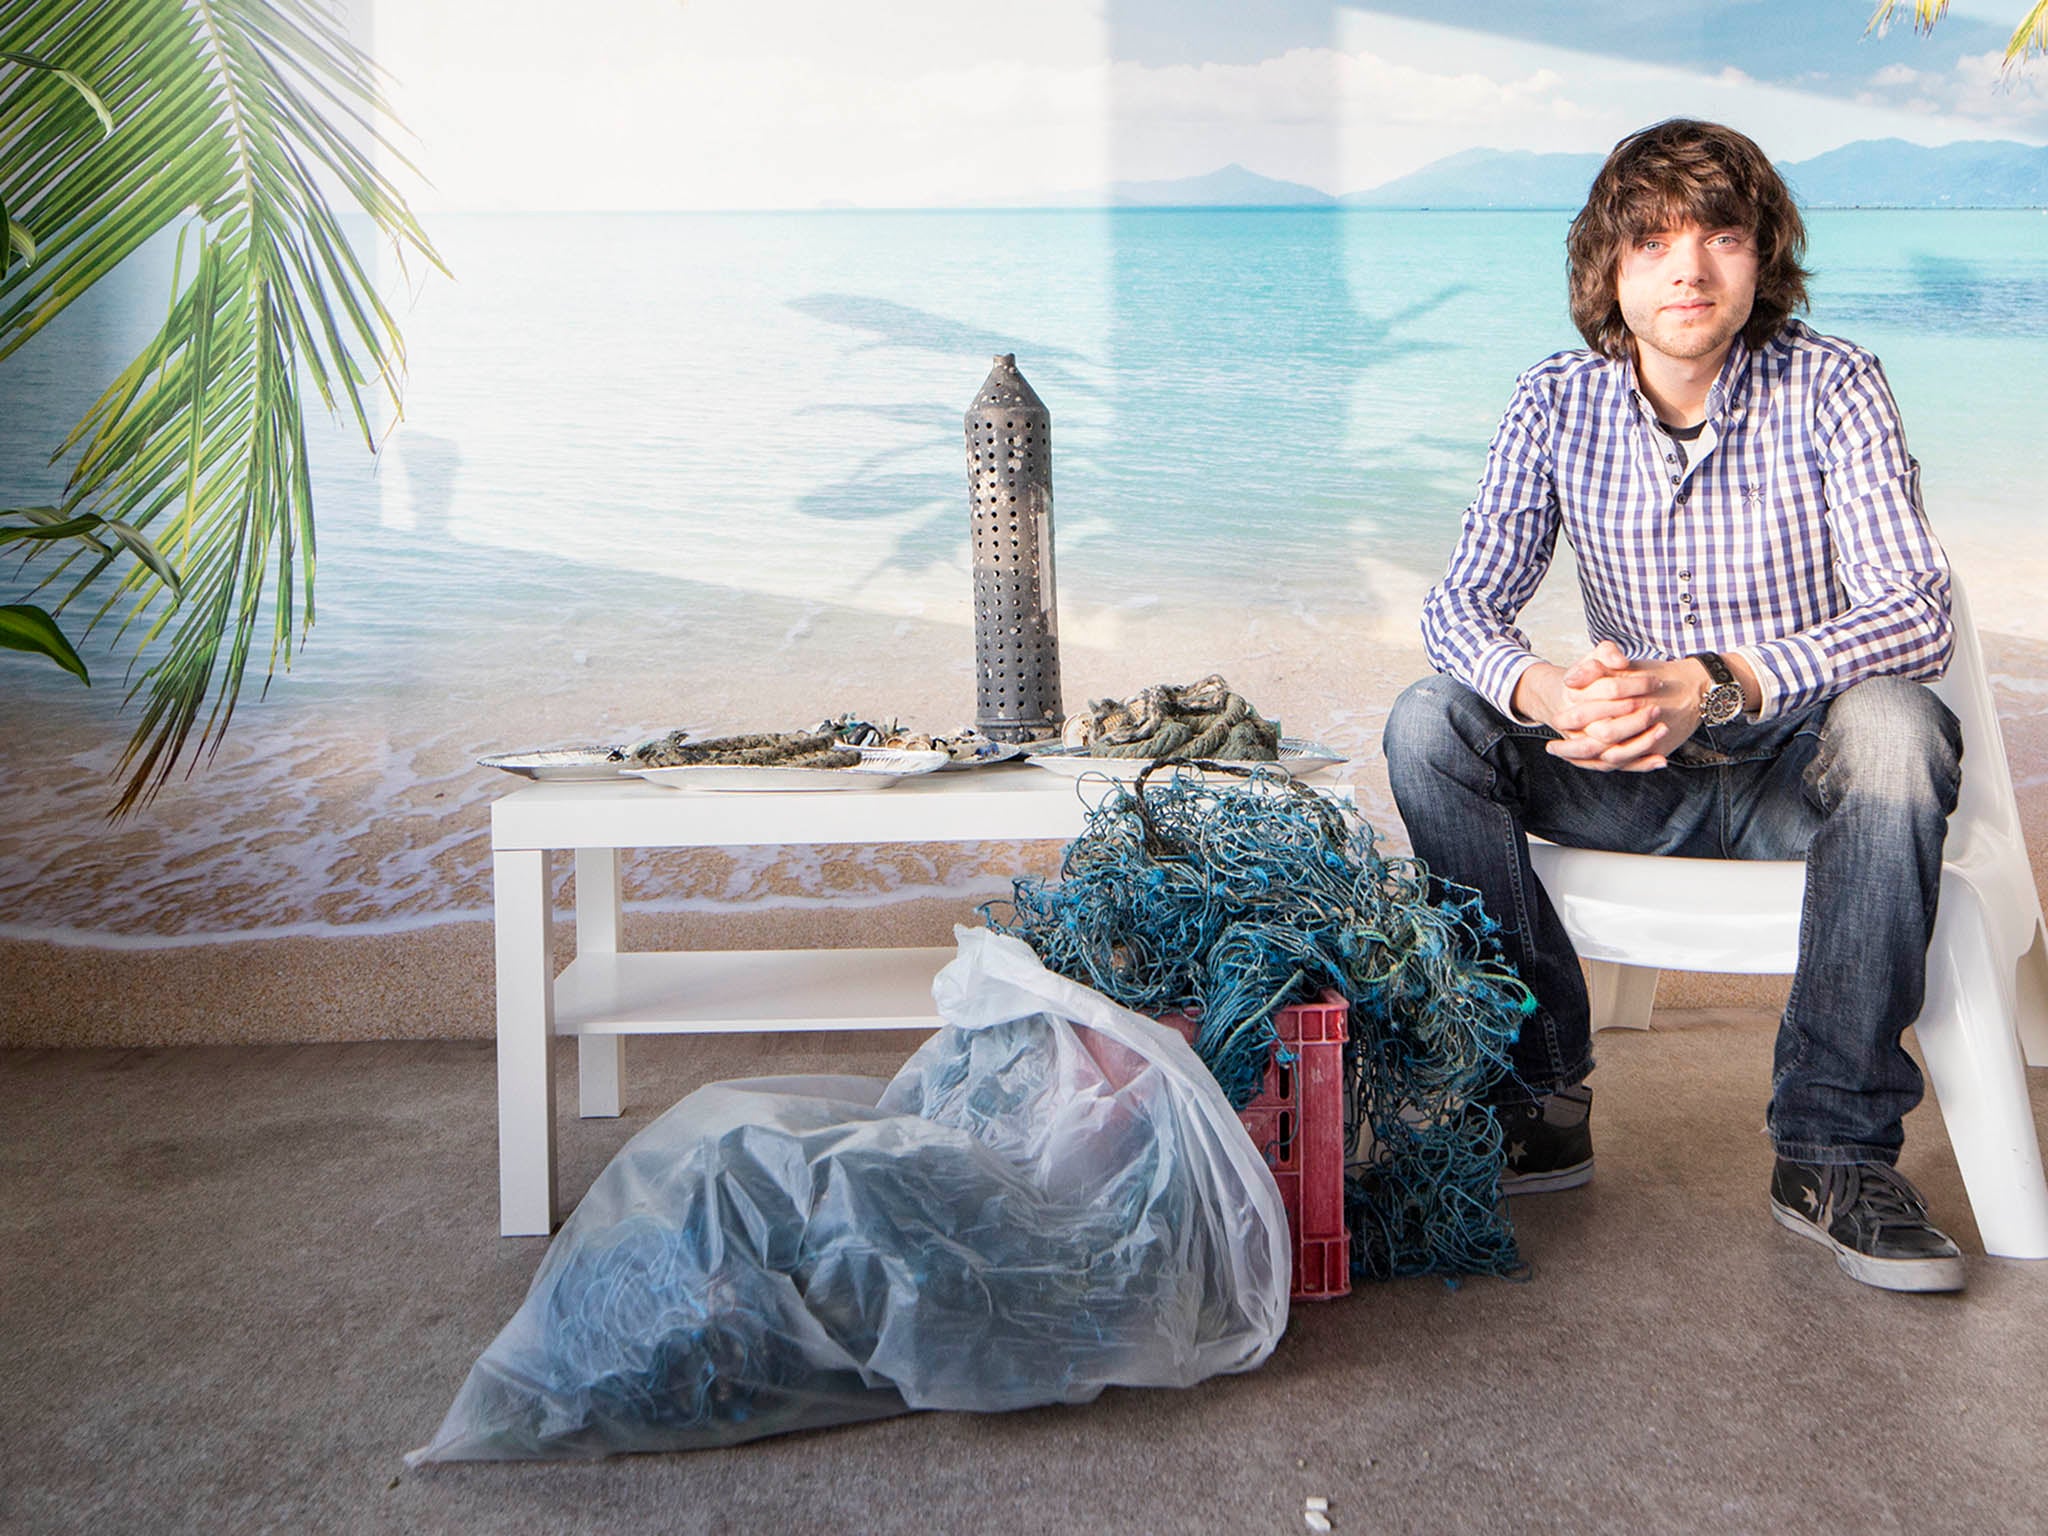 Boyan Slat wants to stop plastics such as fishing nets being dumped in the sea